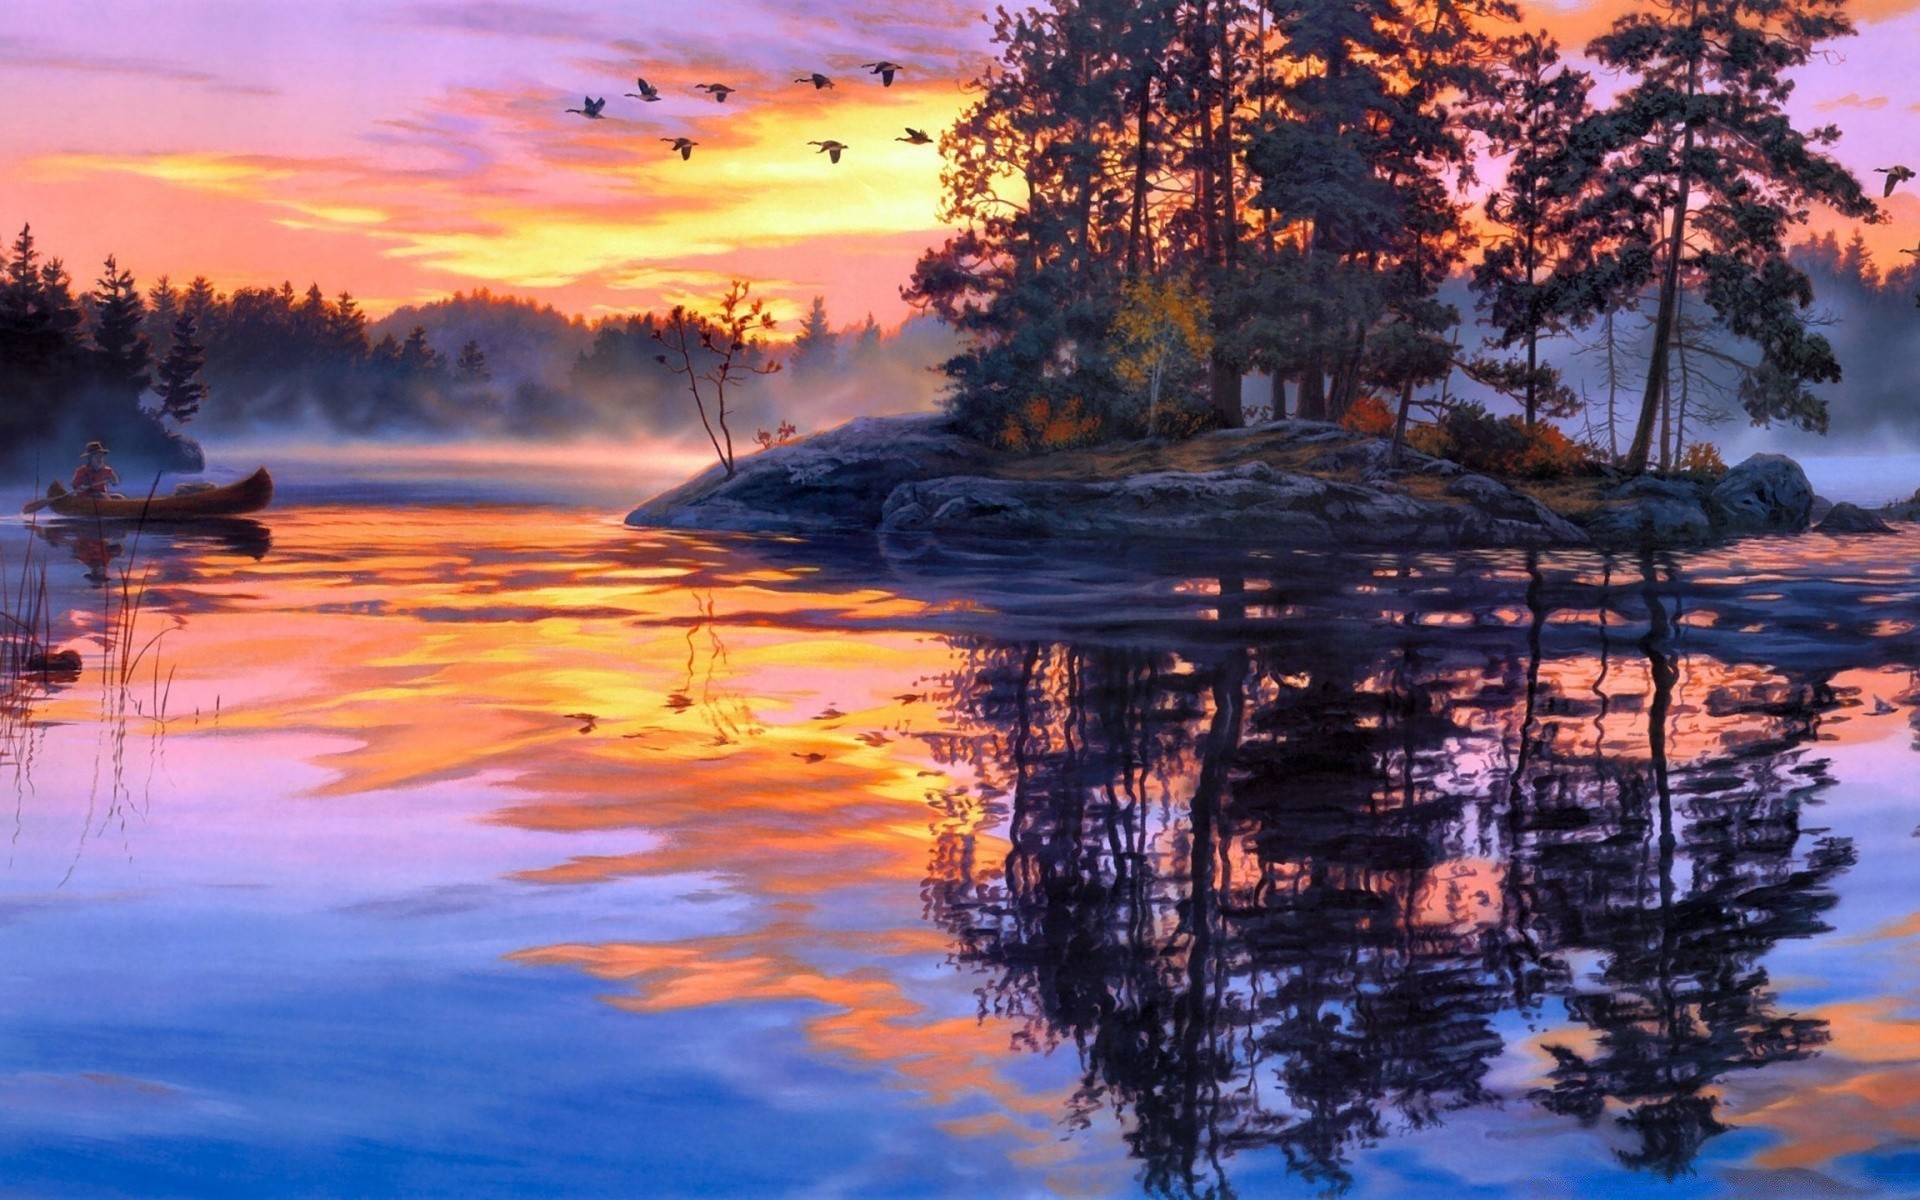 drawings water reflection sunset evening dawn lake dusk nature tree outdoors sky light landscape travel pool river composure